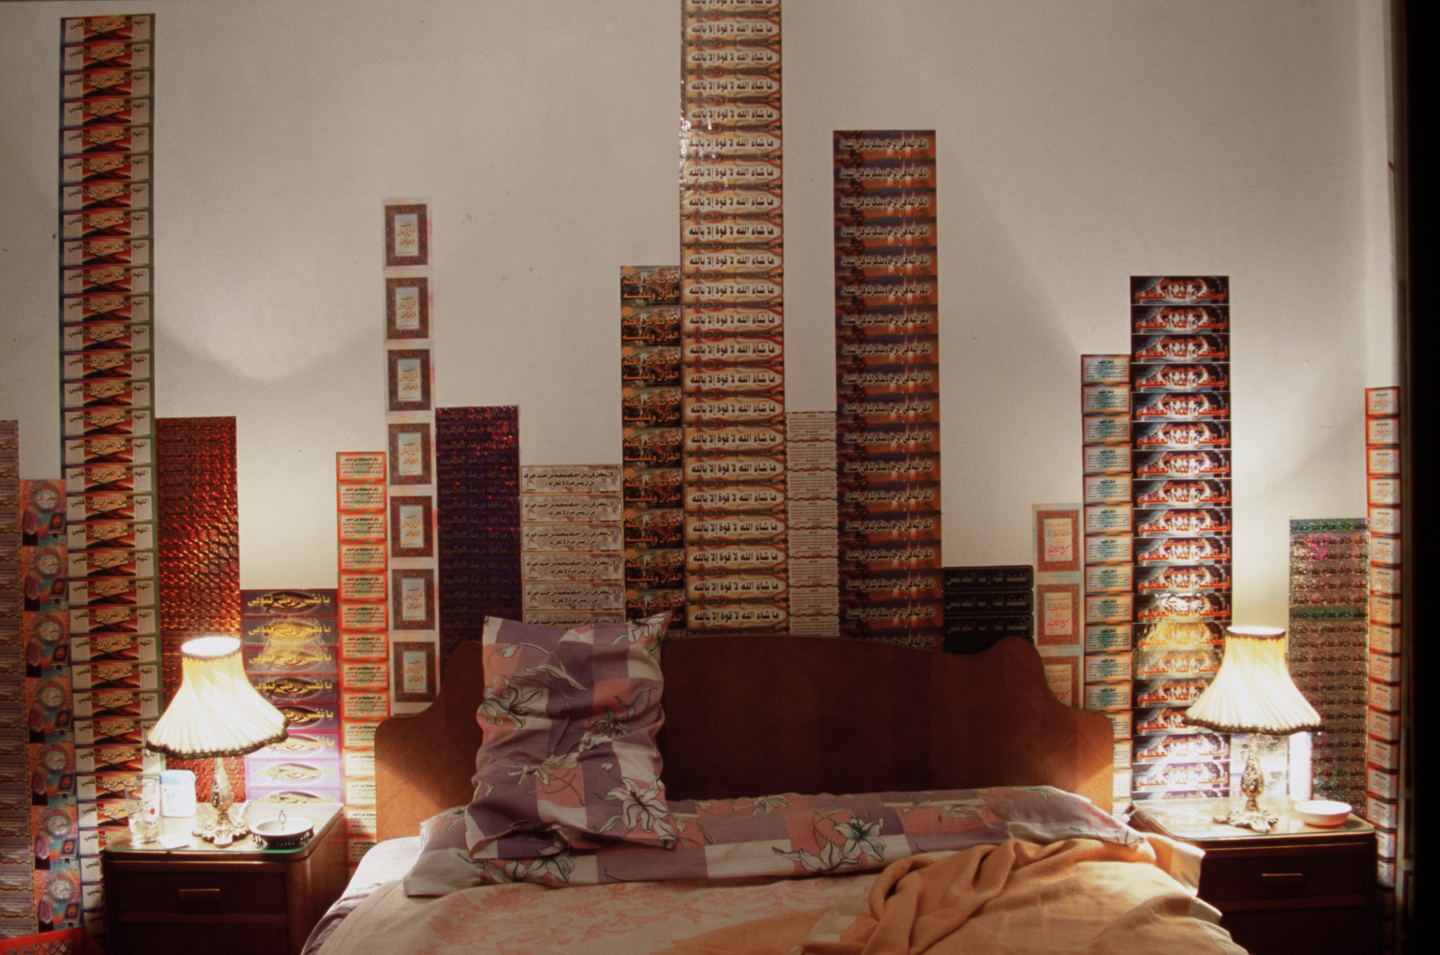  Secure, In a Furnished Flat in Cairo, 2004, site-specific installation. Installation view.   
  
   Normal 
   0 
   
   
   
   
   false 
   false 
   false 
   
   EN-US 
   JA 
   X-NONE 
   
  
  
  
  
  
  
  
  
  
  
   
   
  
  
  
  
  
